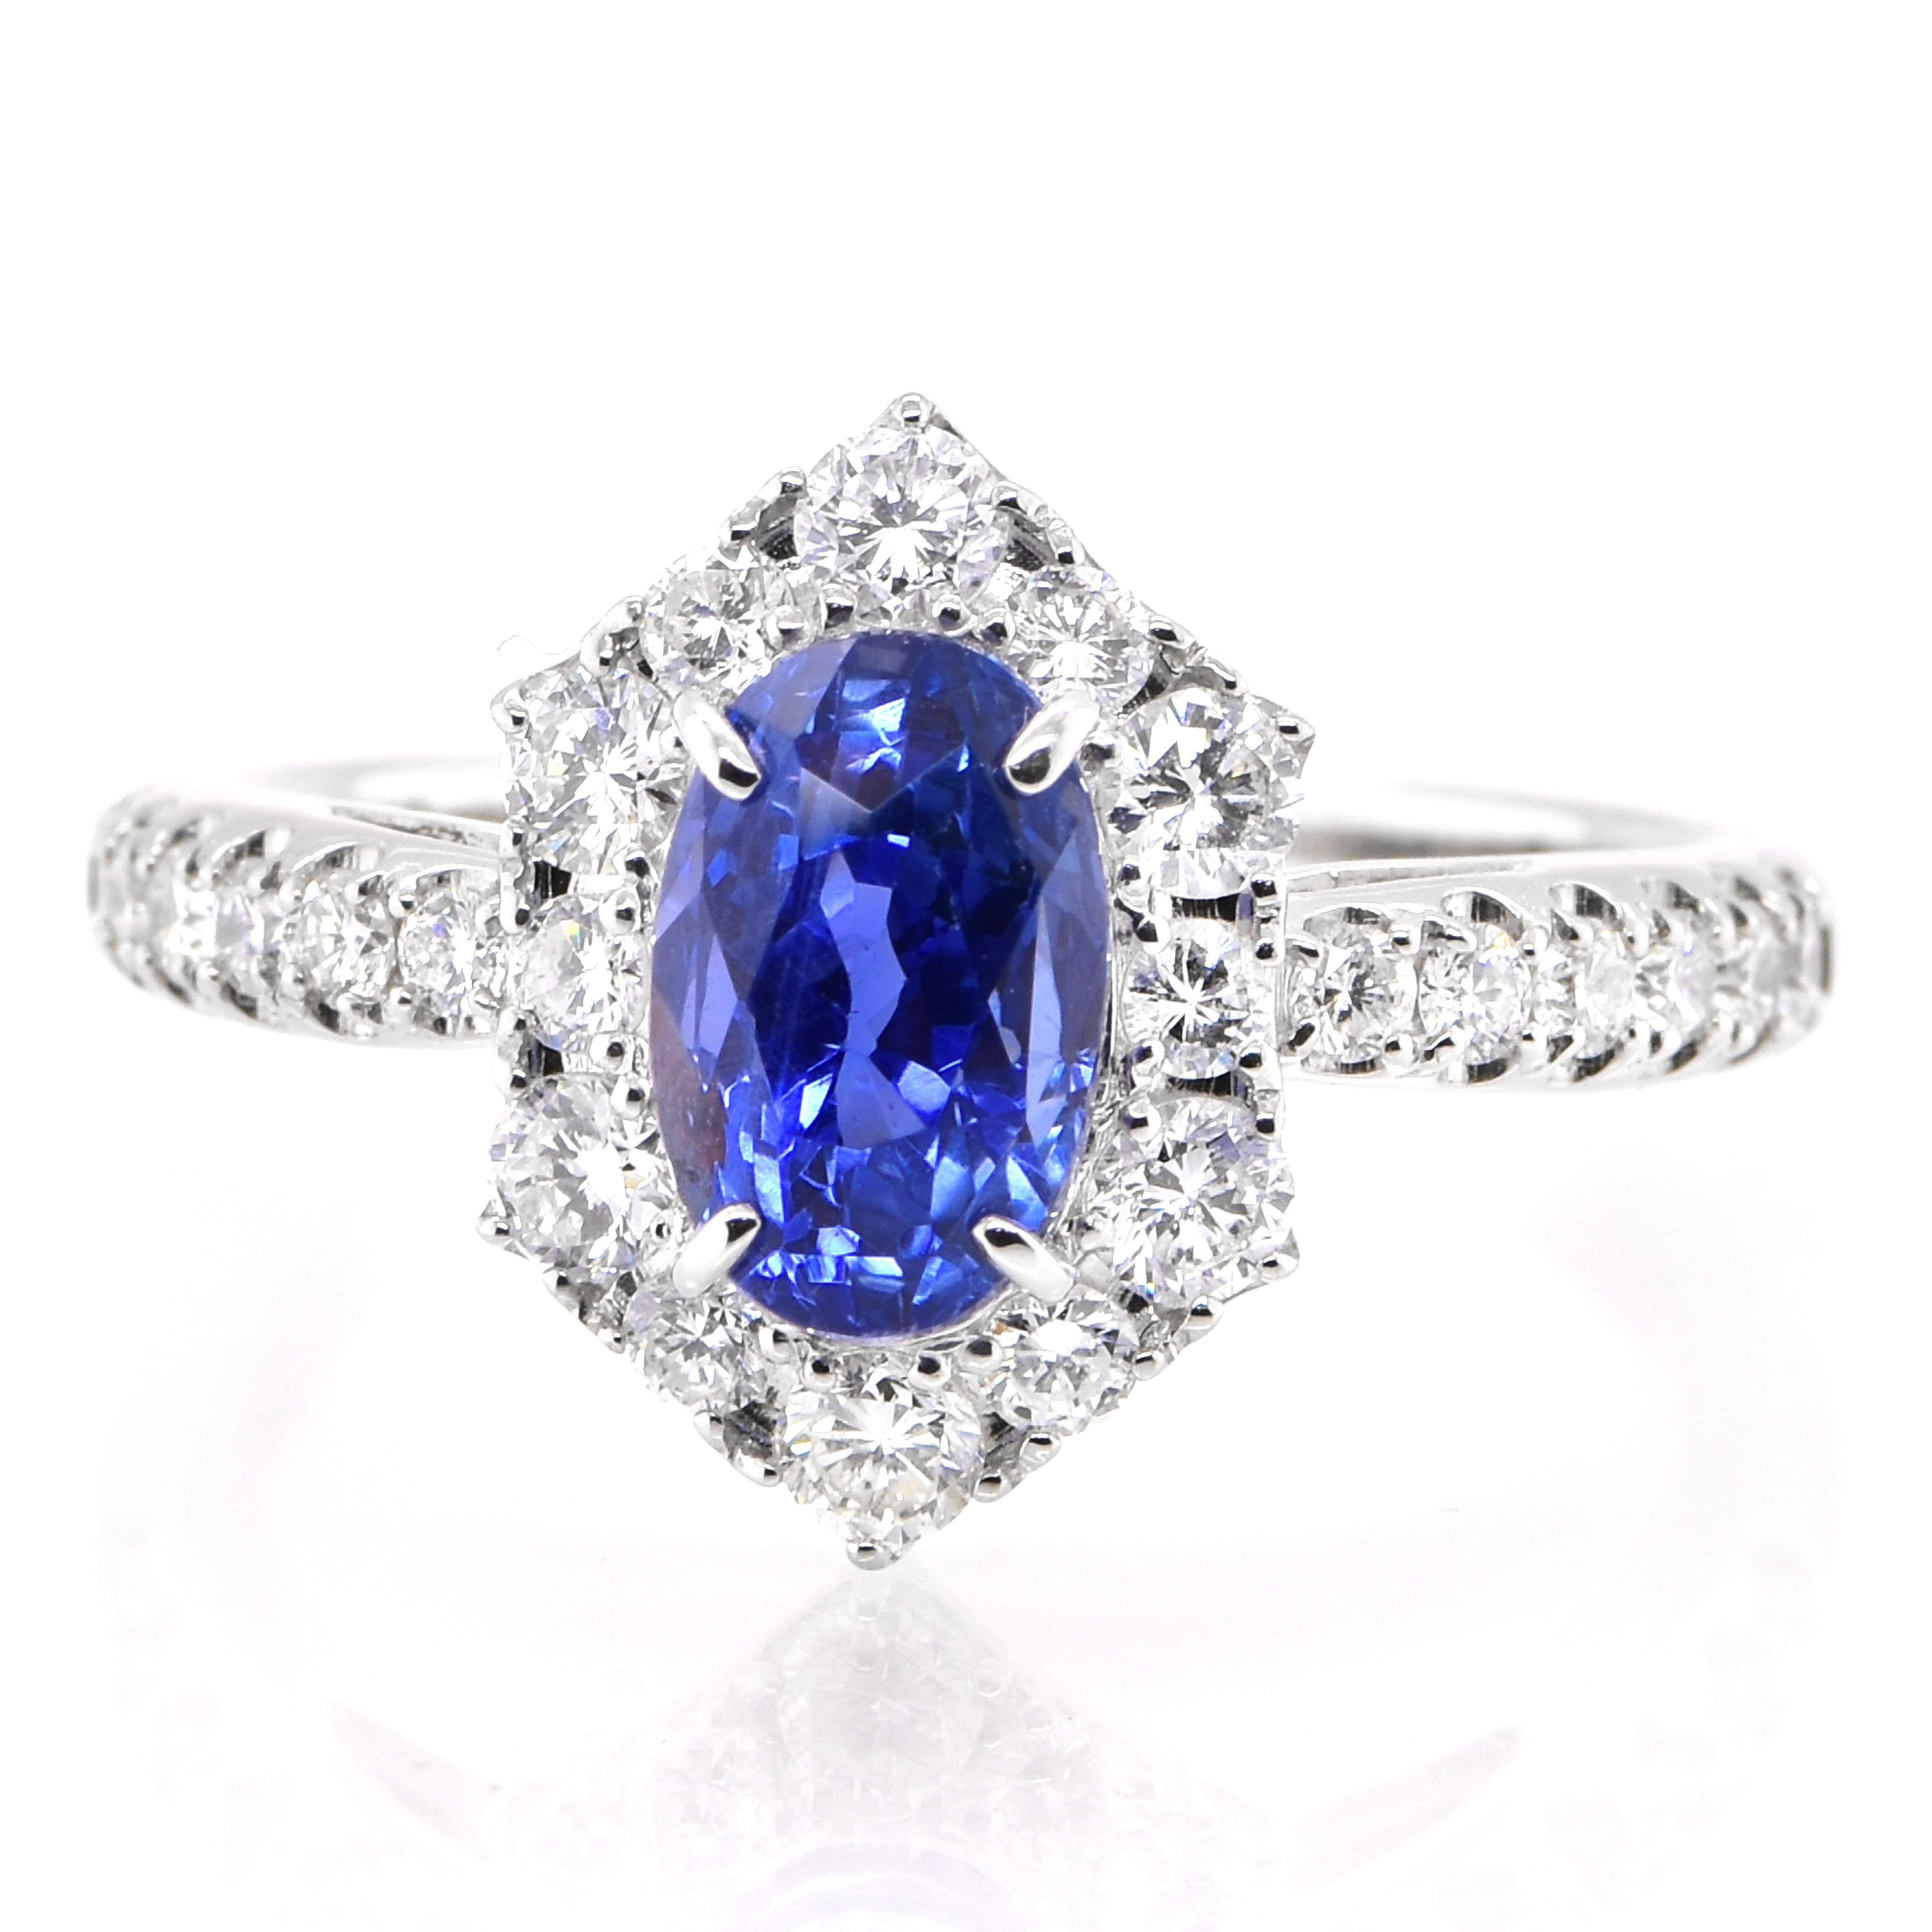 A beautiful ring featuring 2.273 Carat Natural Blue Sapphire and 0.70 Carats Diamond Accents set in Platinum. Sapphires have extraordinary durability - they excel in hardness as well as toughness and durability making them very popular in jewelry.